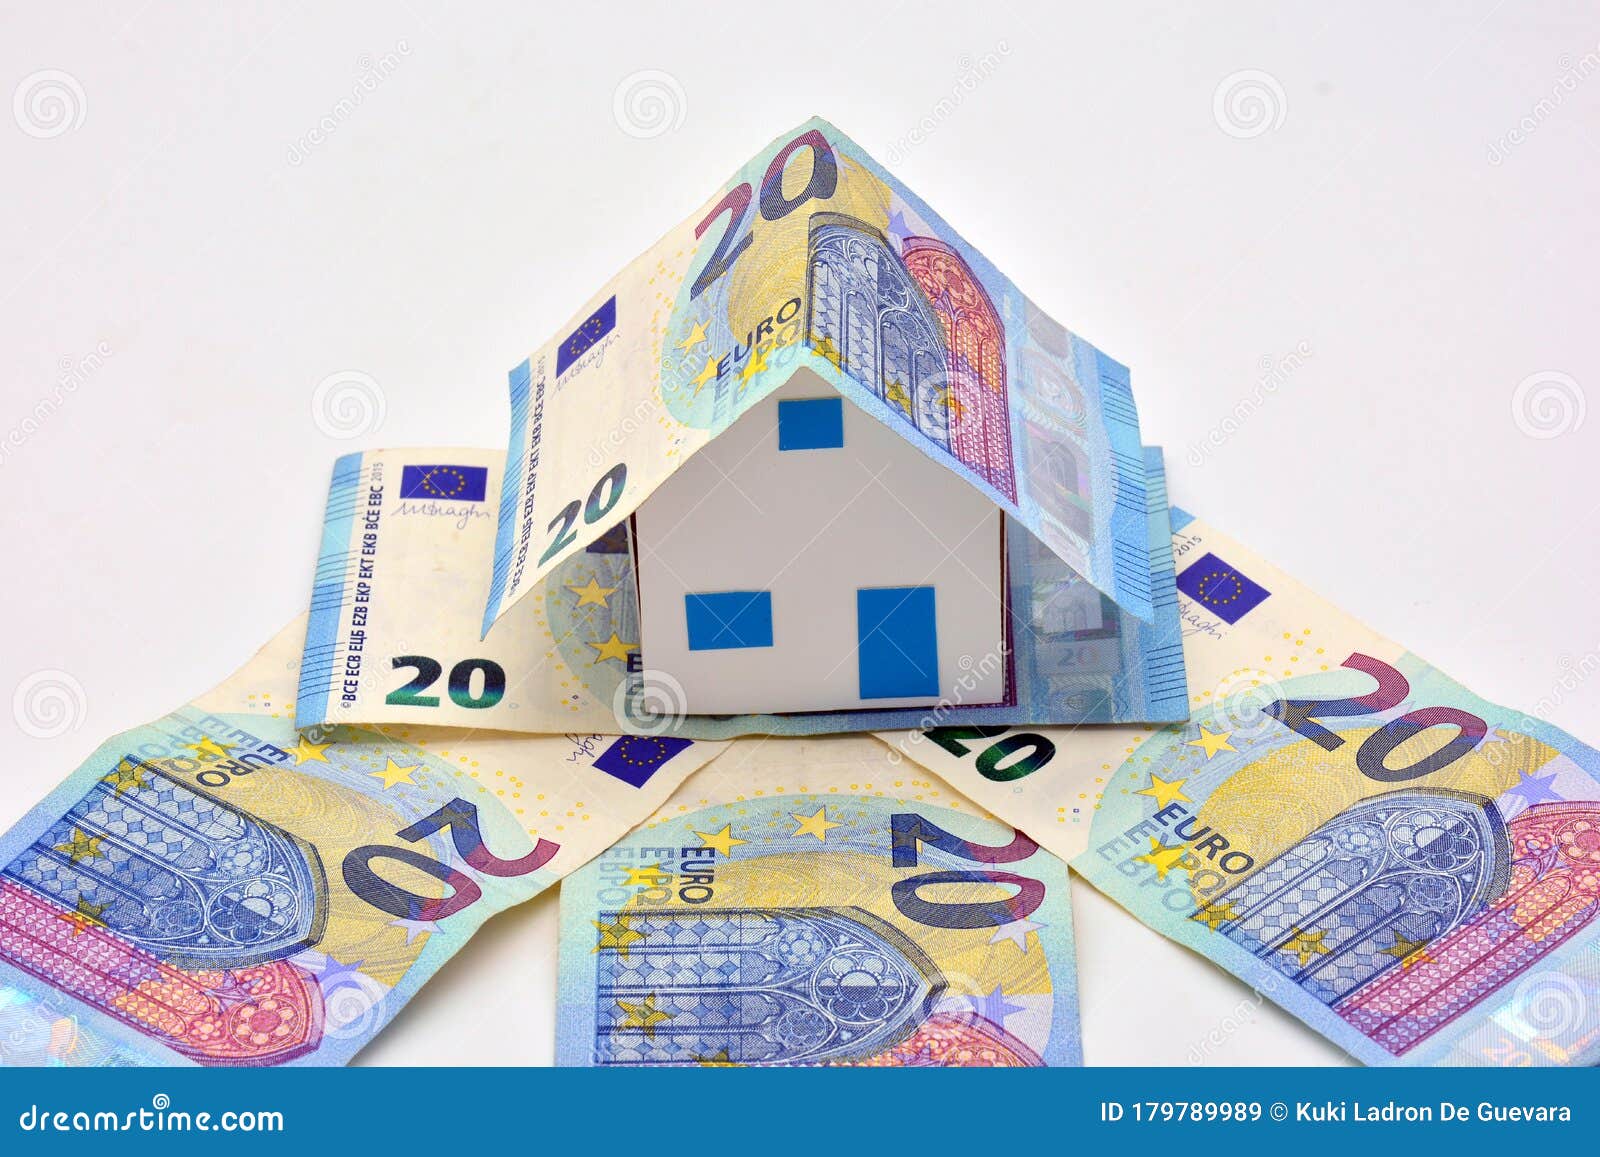 house made with 50 and 20 euro bills